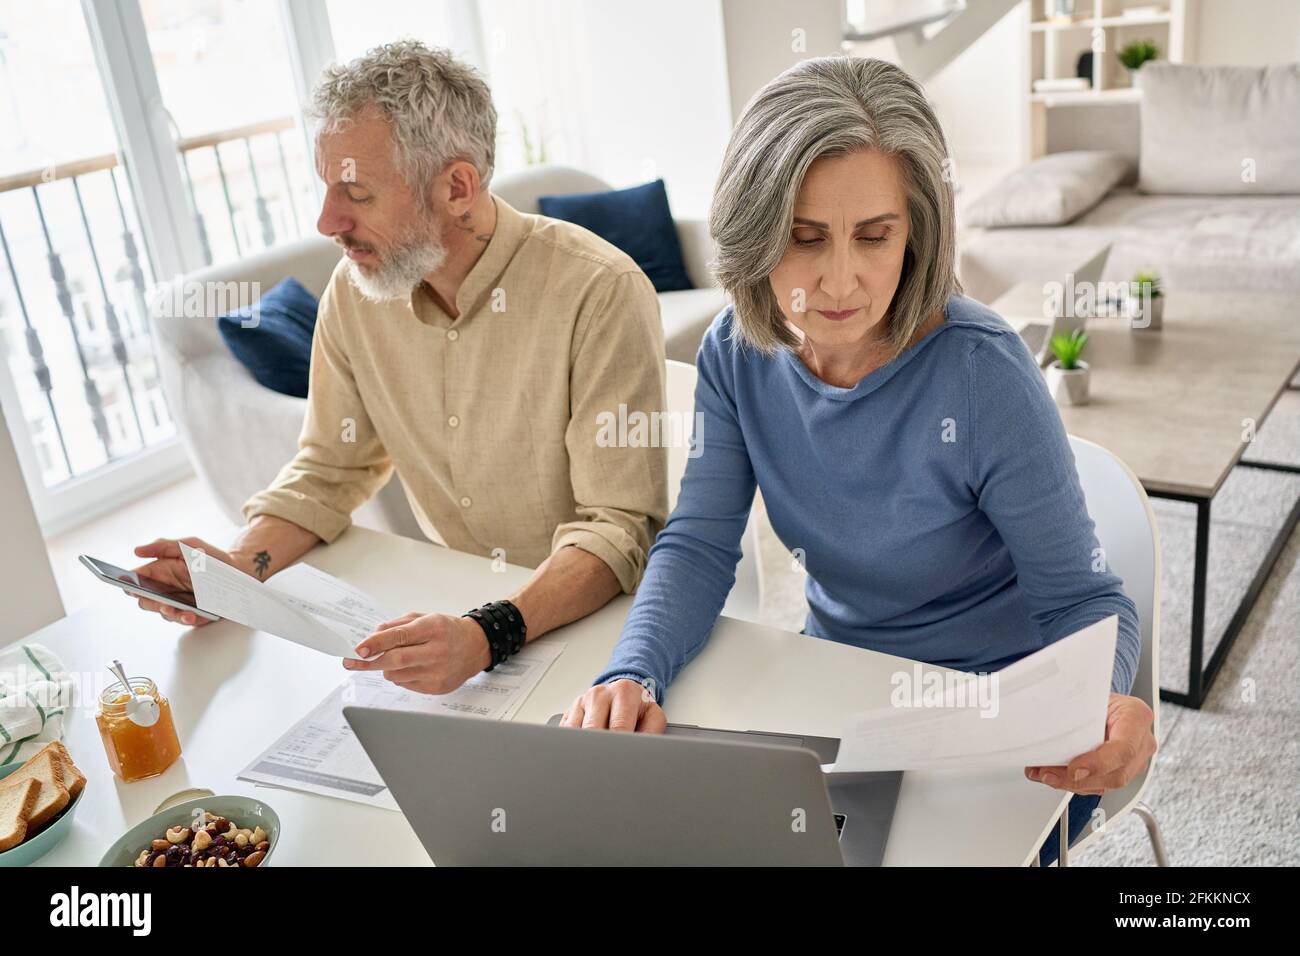 Mature couple reading documents bills paying bank loan using laptop and phone. Stock Photo